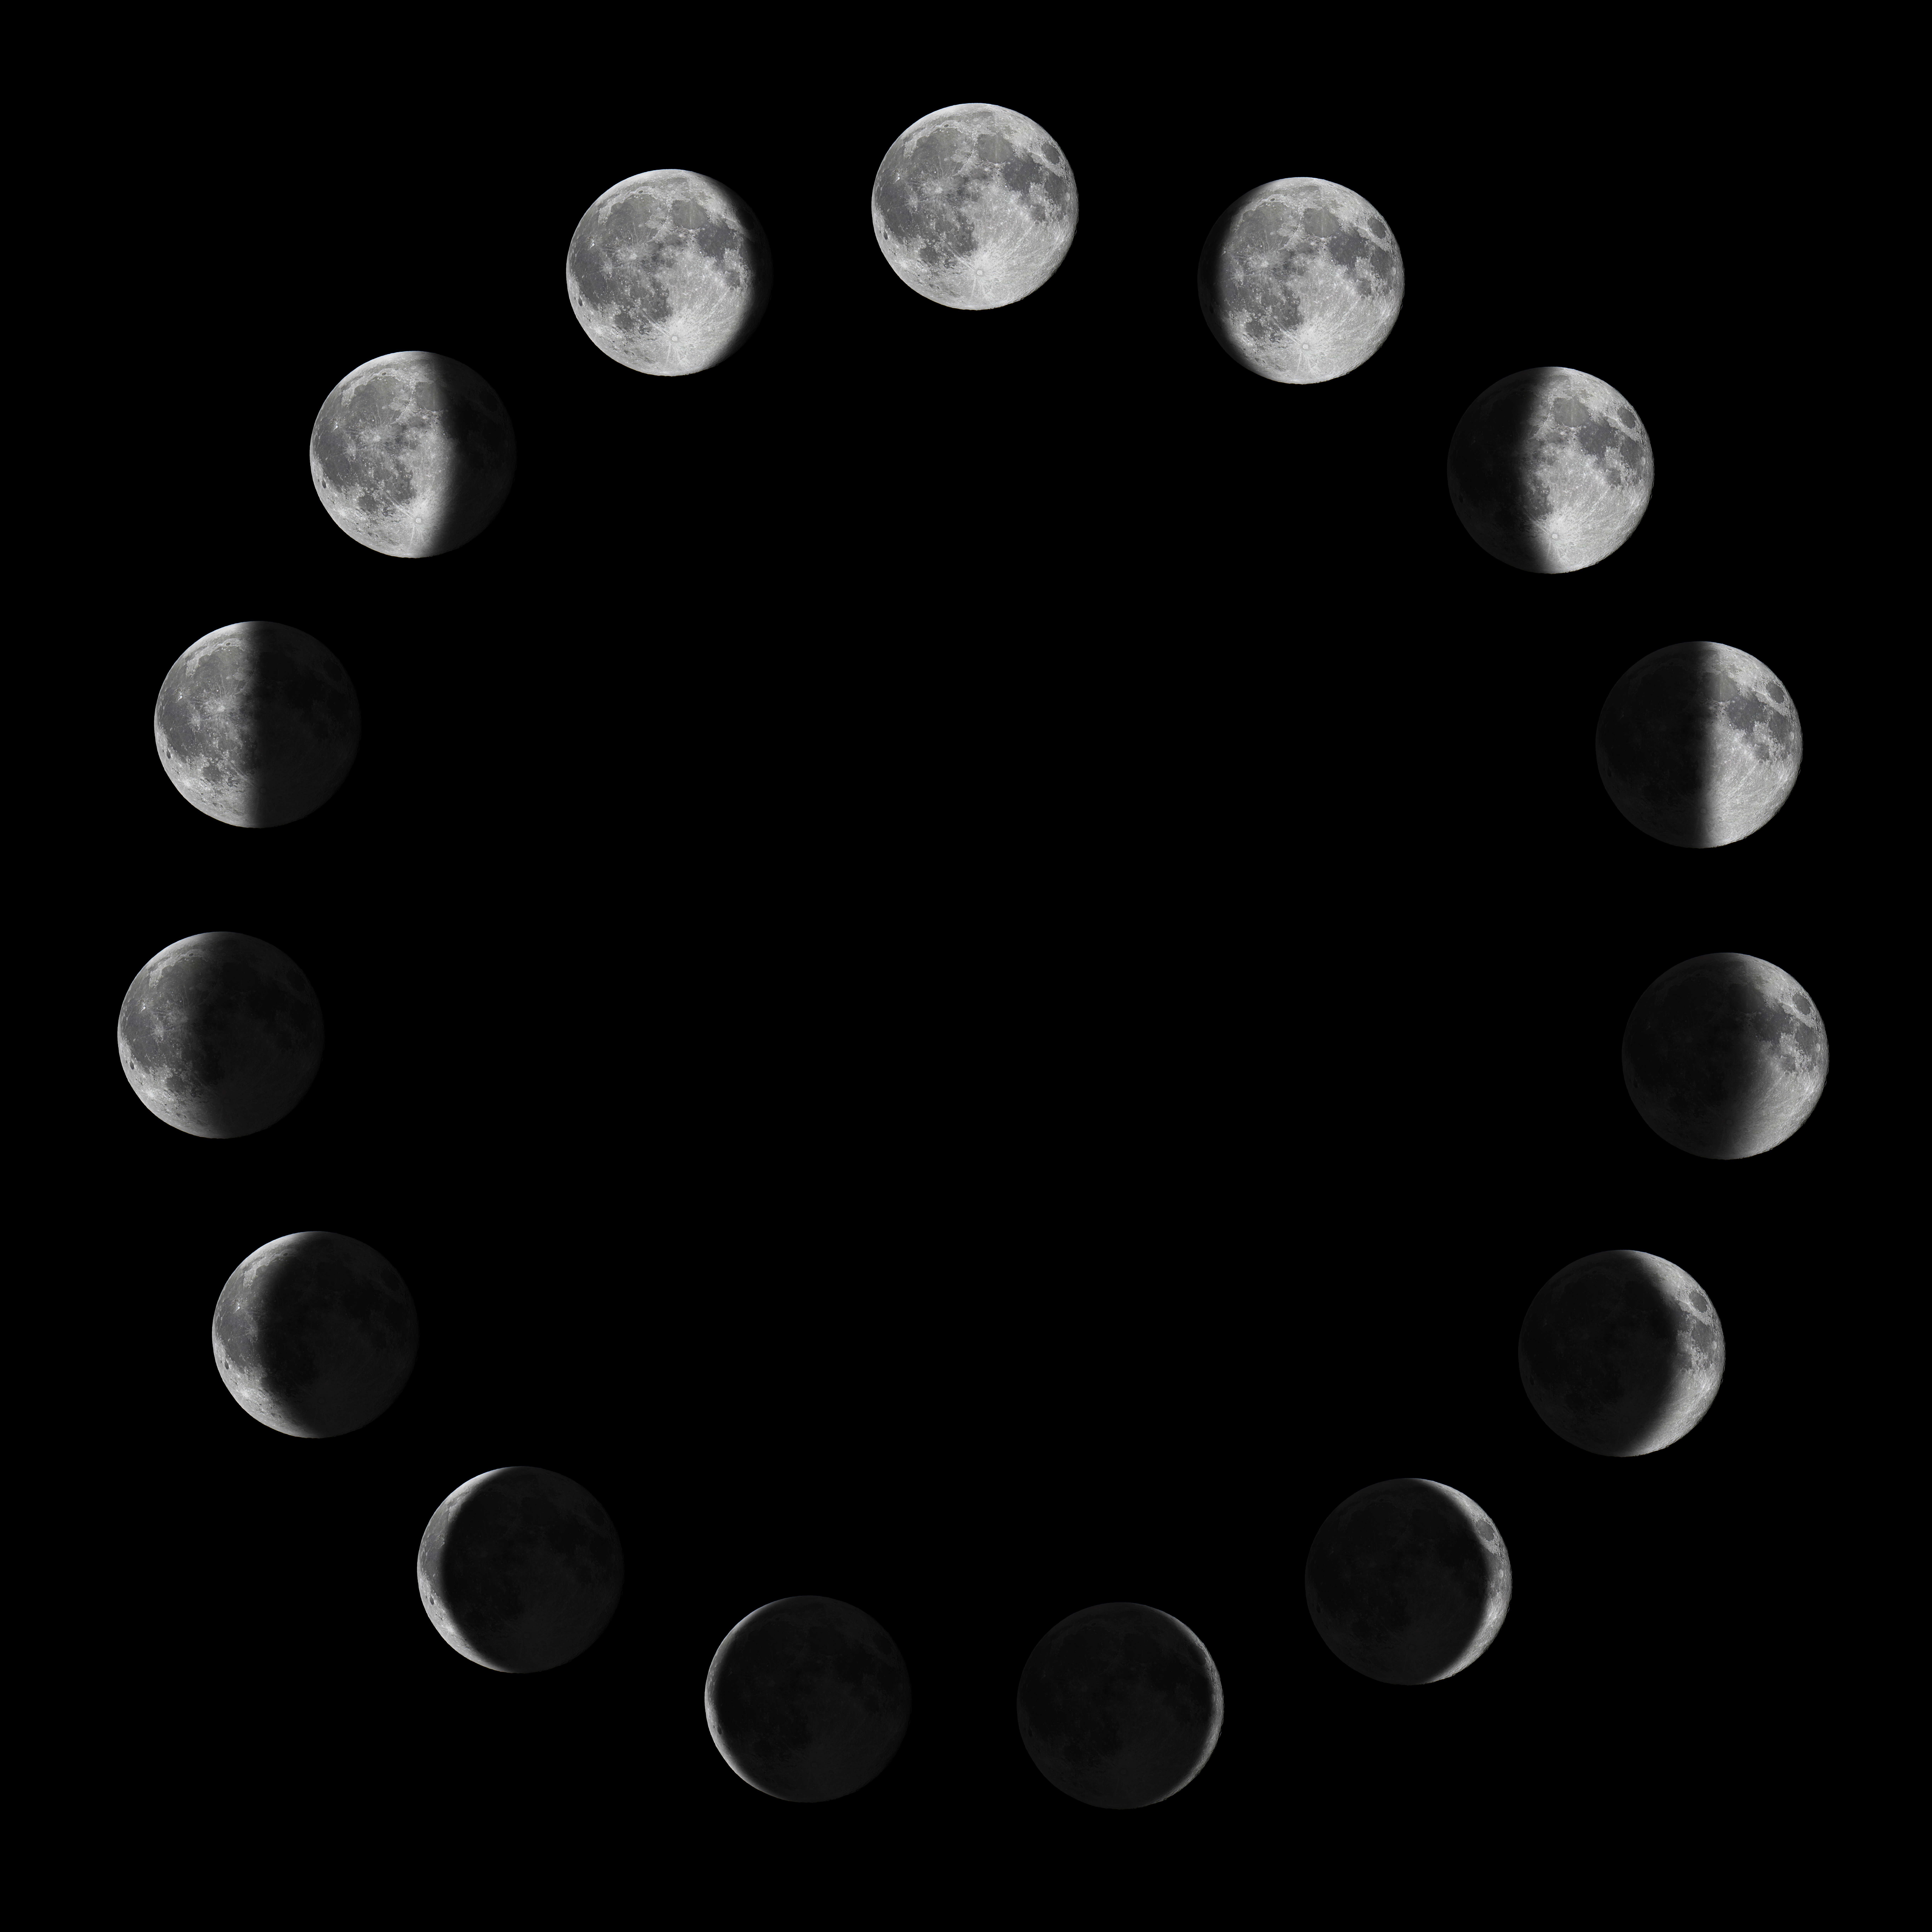 When is the Lunar Cycle 2023?